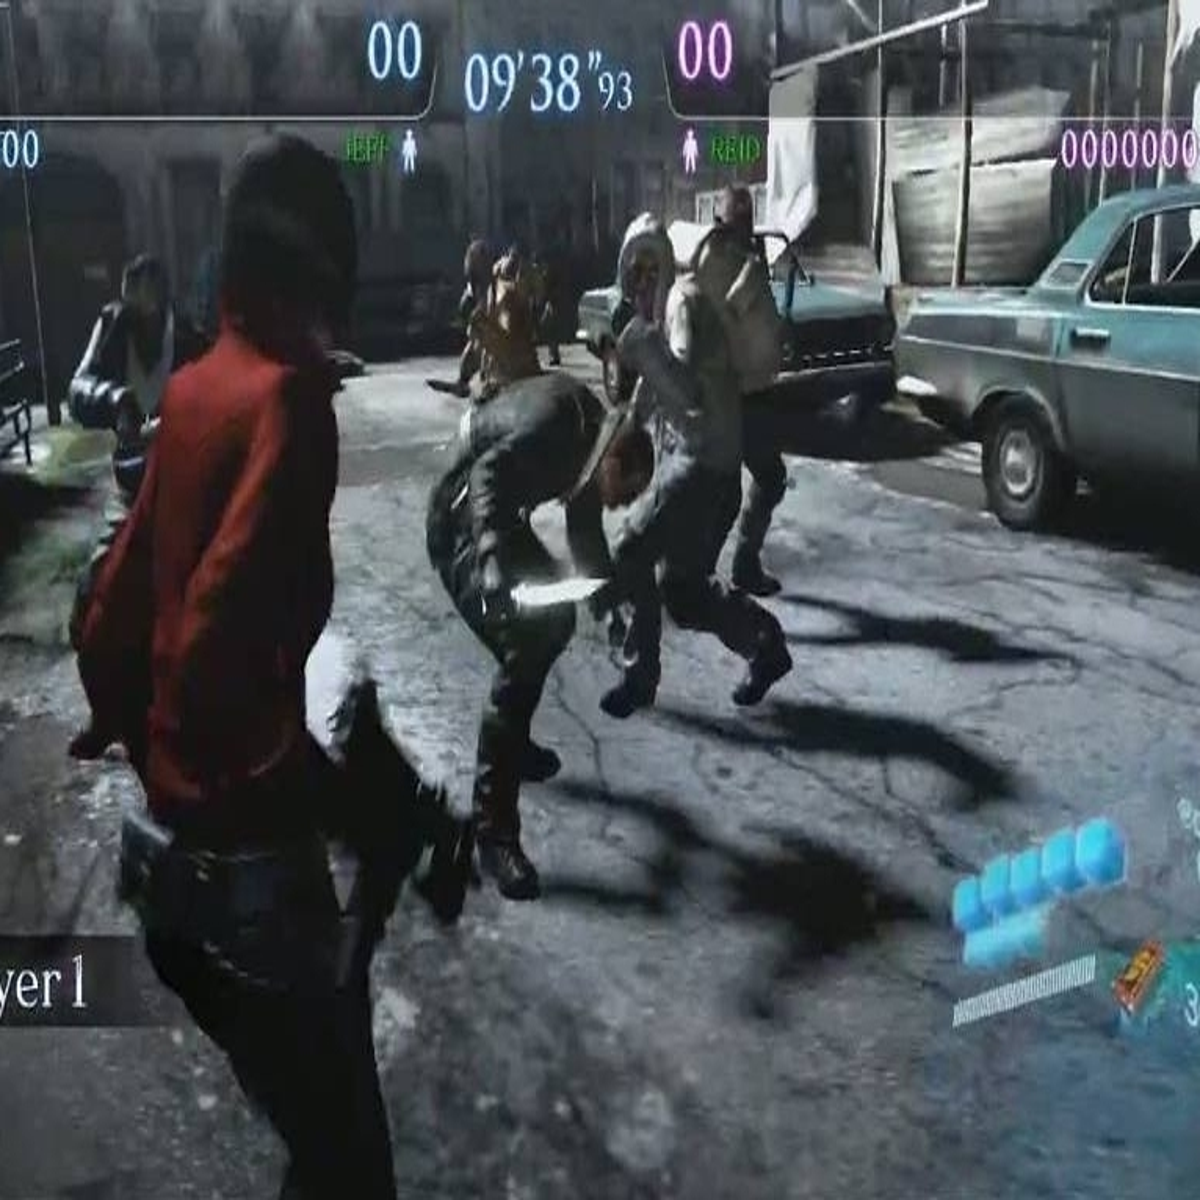 Resident Evil 6' Could Feature Ada Wong Campaign